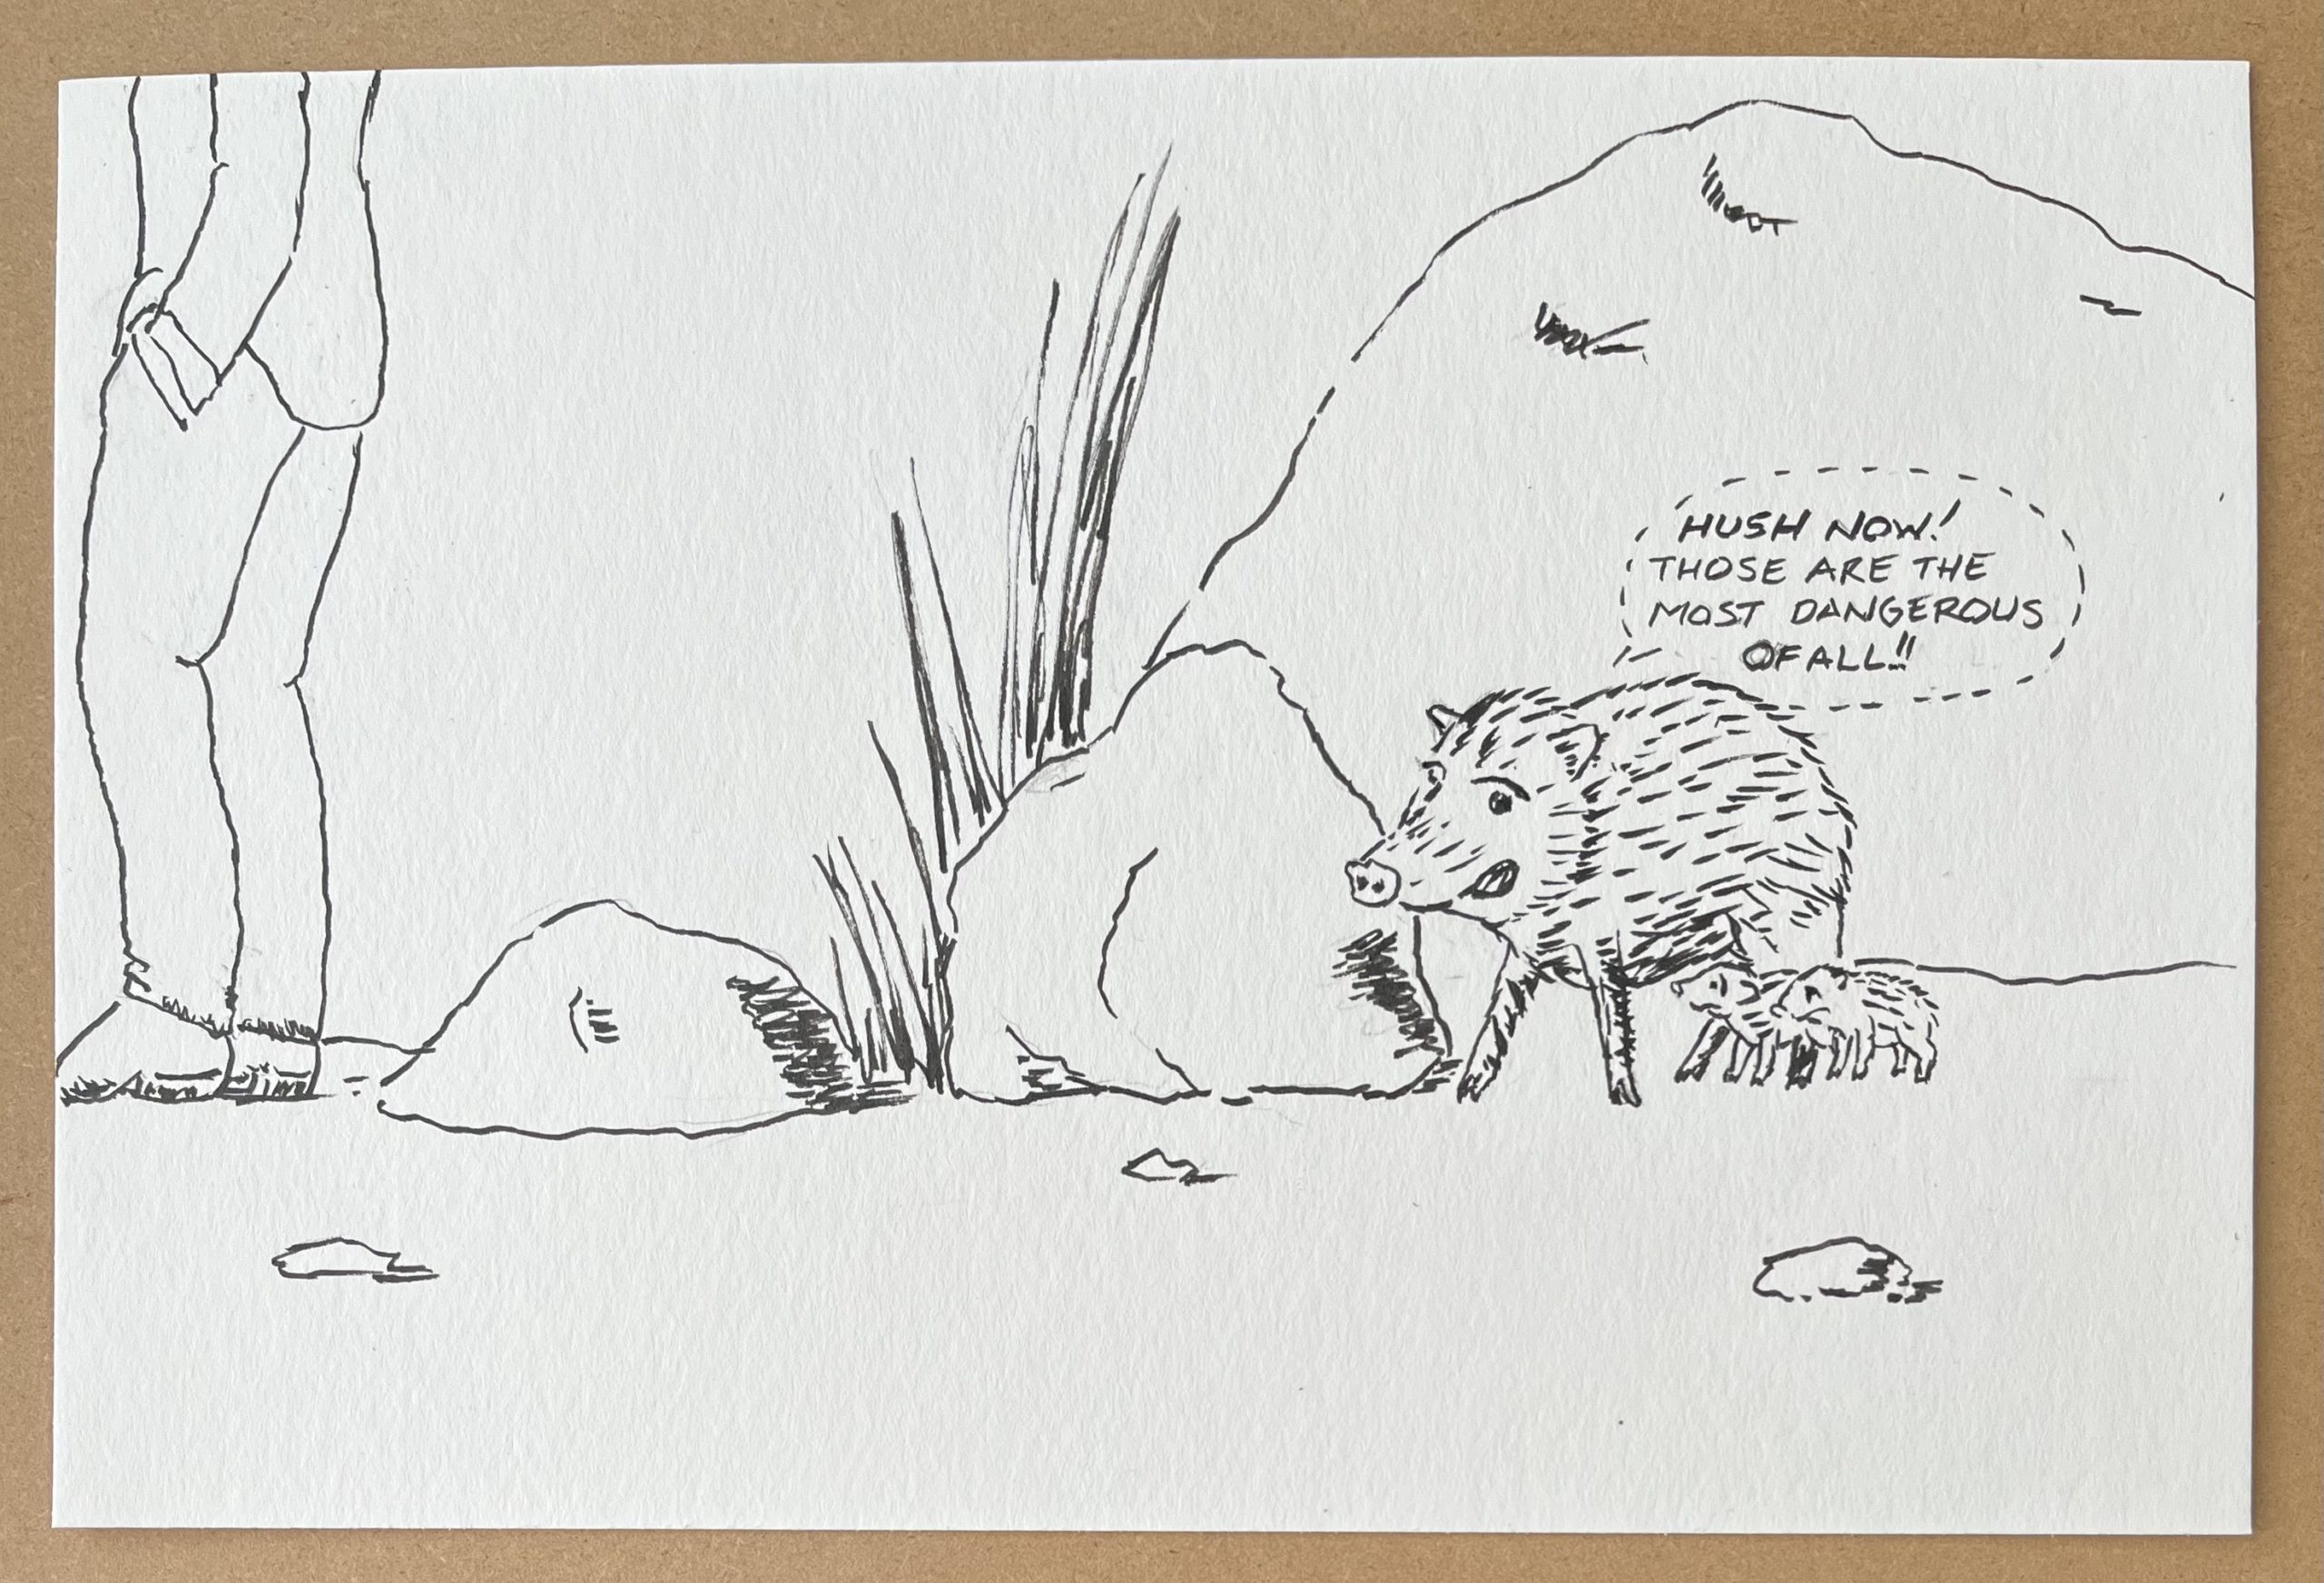 A pen and ink drawing showing a mother javelina hiding behind a rock with her two offspring. On the other side of the rock is a standing human. The mother javelina is whispering to the babies "These are the most dangerous of all."